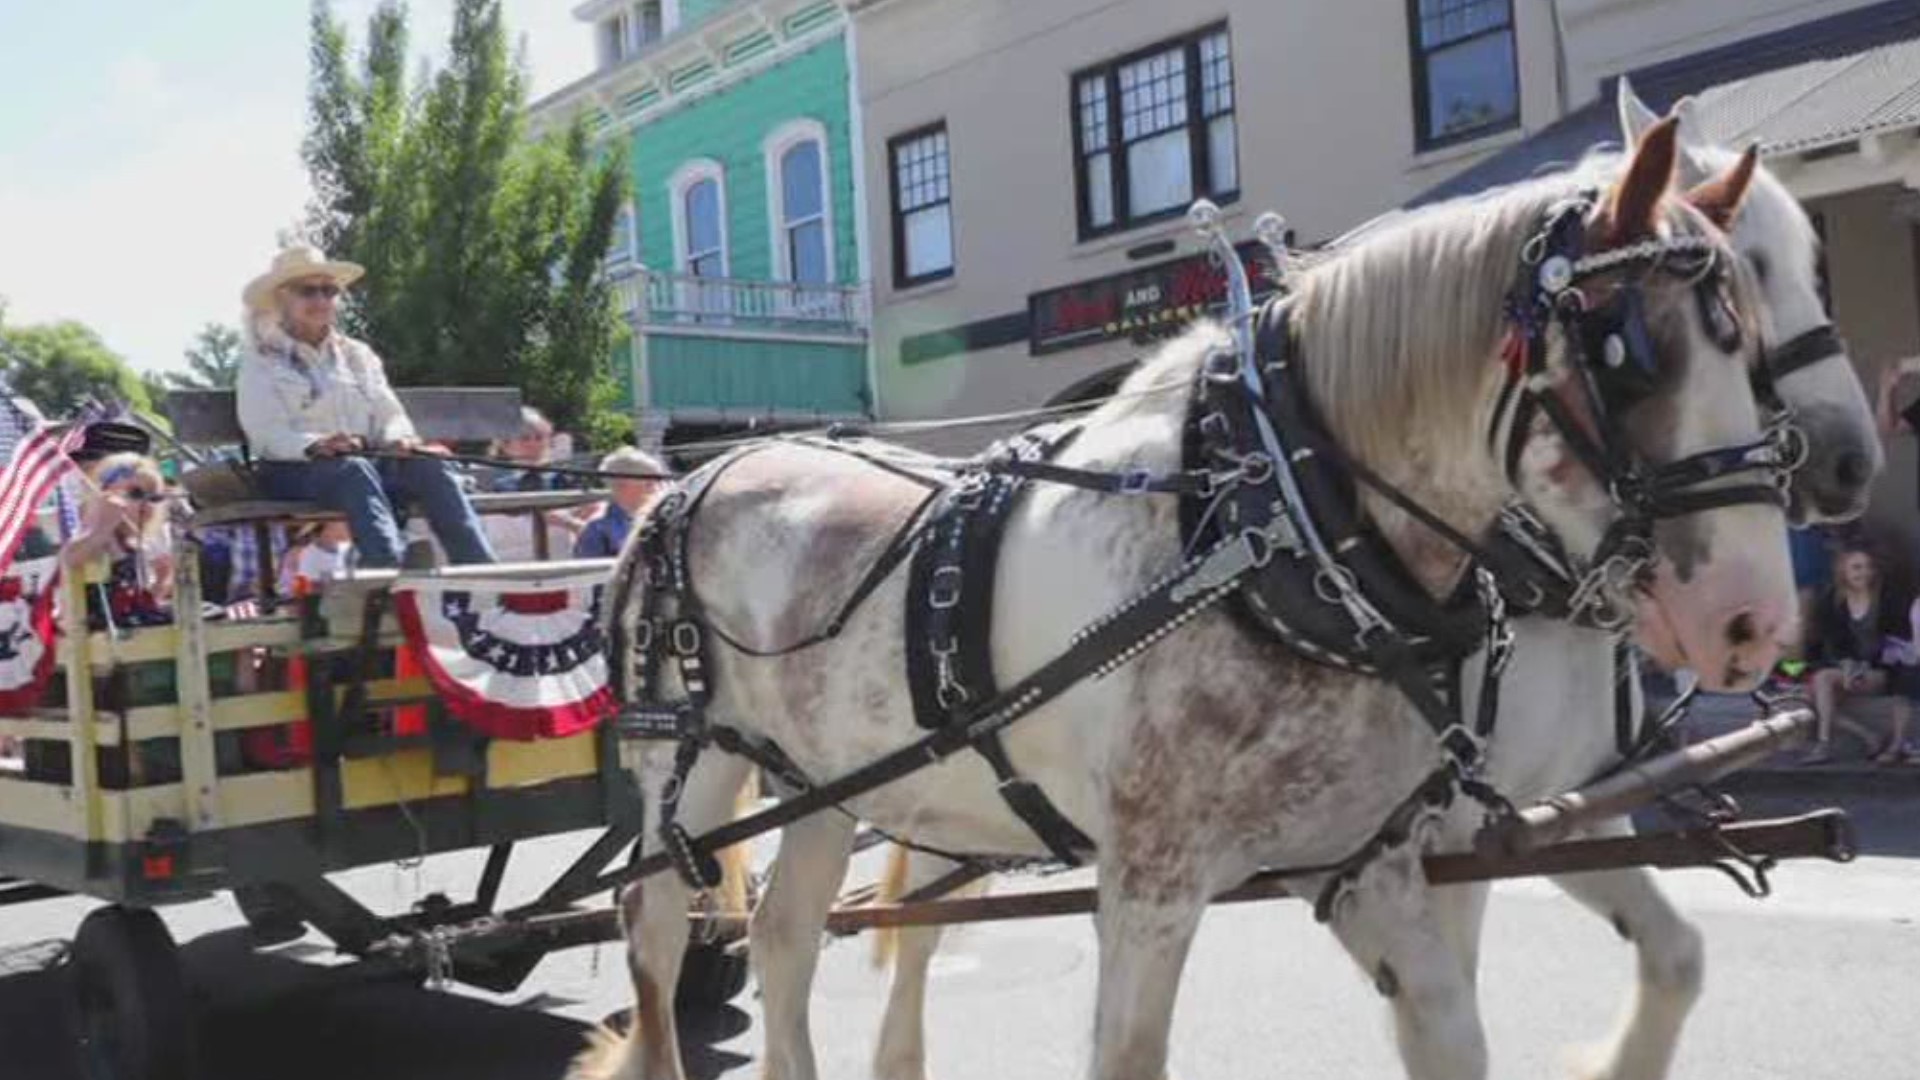 This very entertaining procession will range from funky floats to Wild West re-enactments along Historic Folsom's Sutter Street, with live music along the route.